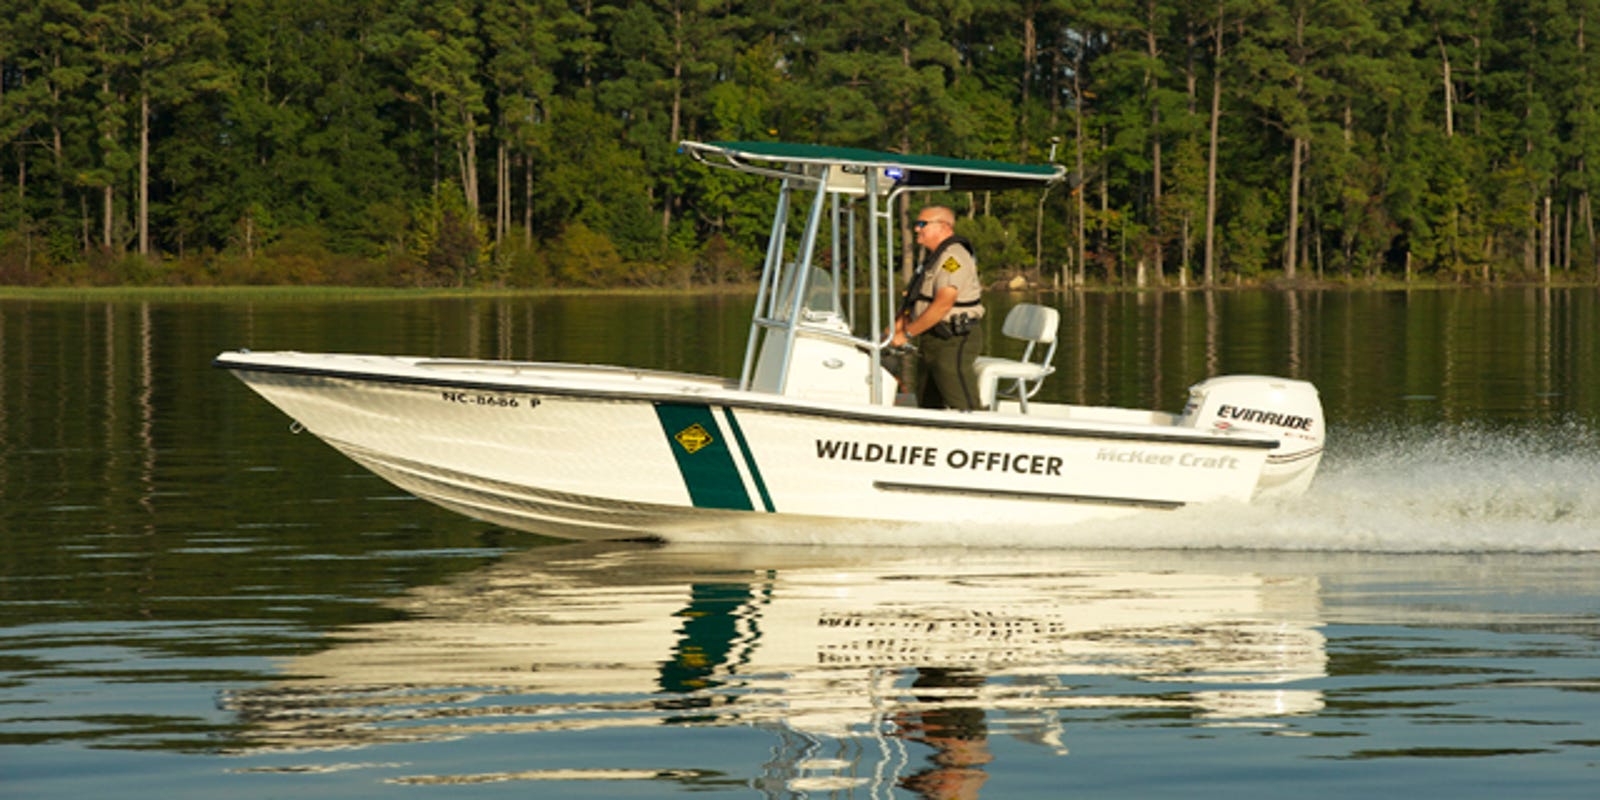 North Carolina has deadliest year for boating accidents in nearly 30 years